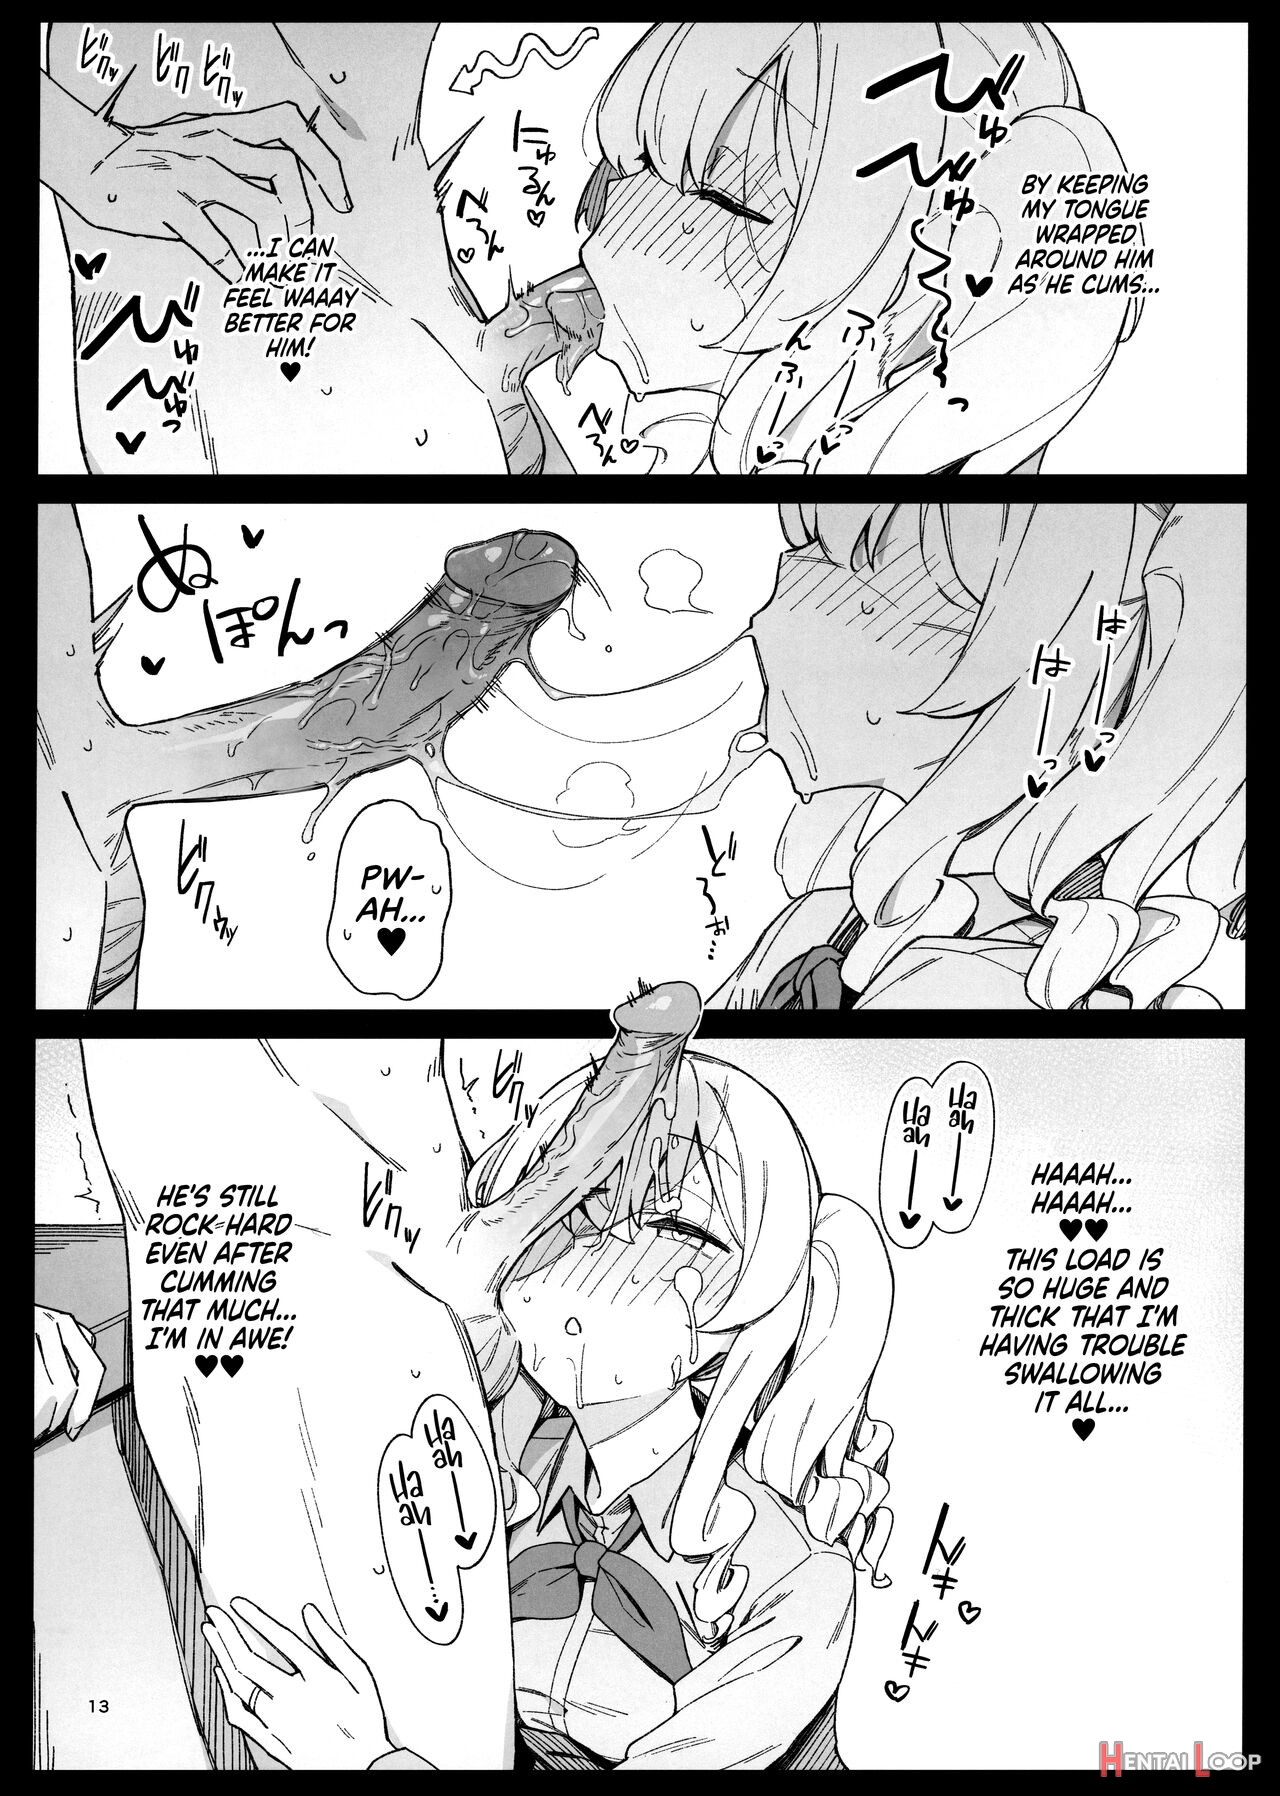 Warship Marriage Lewd Records 4 page 13